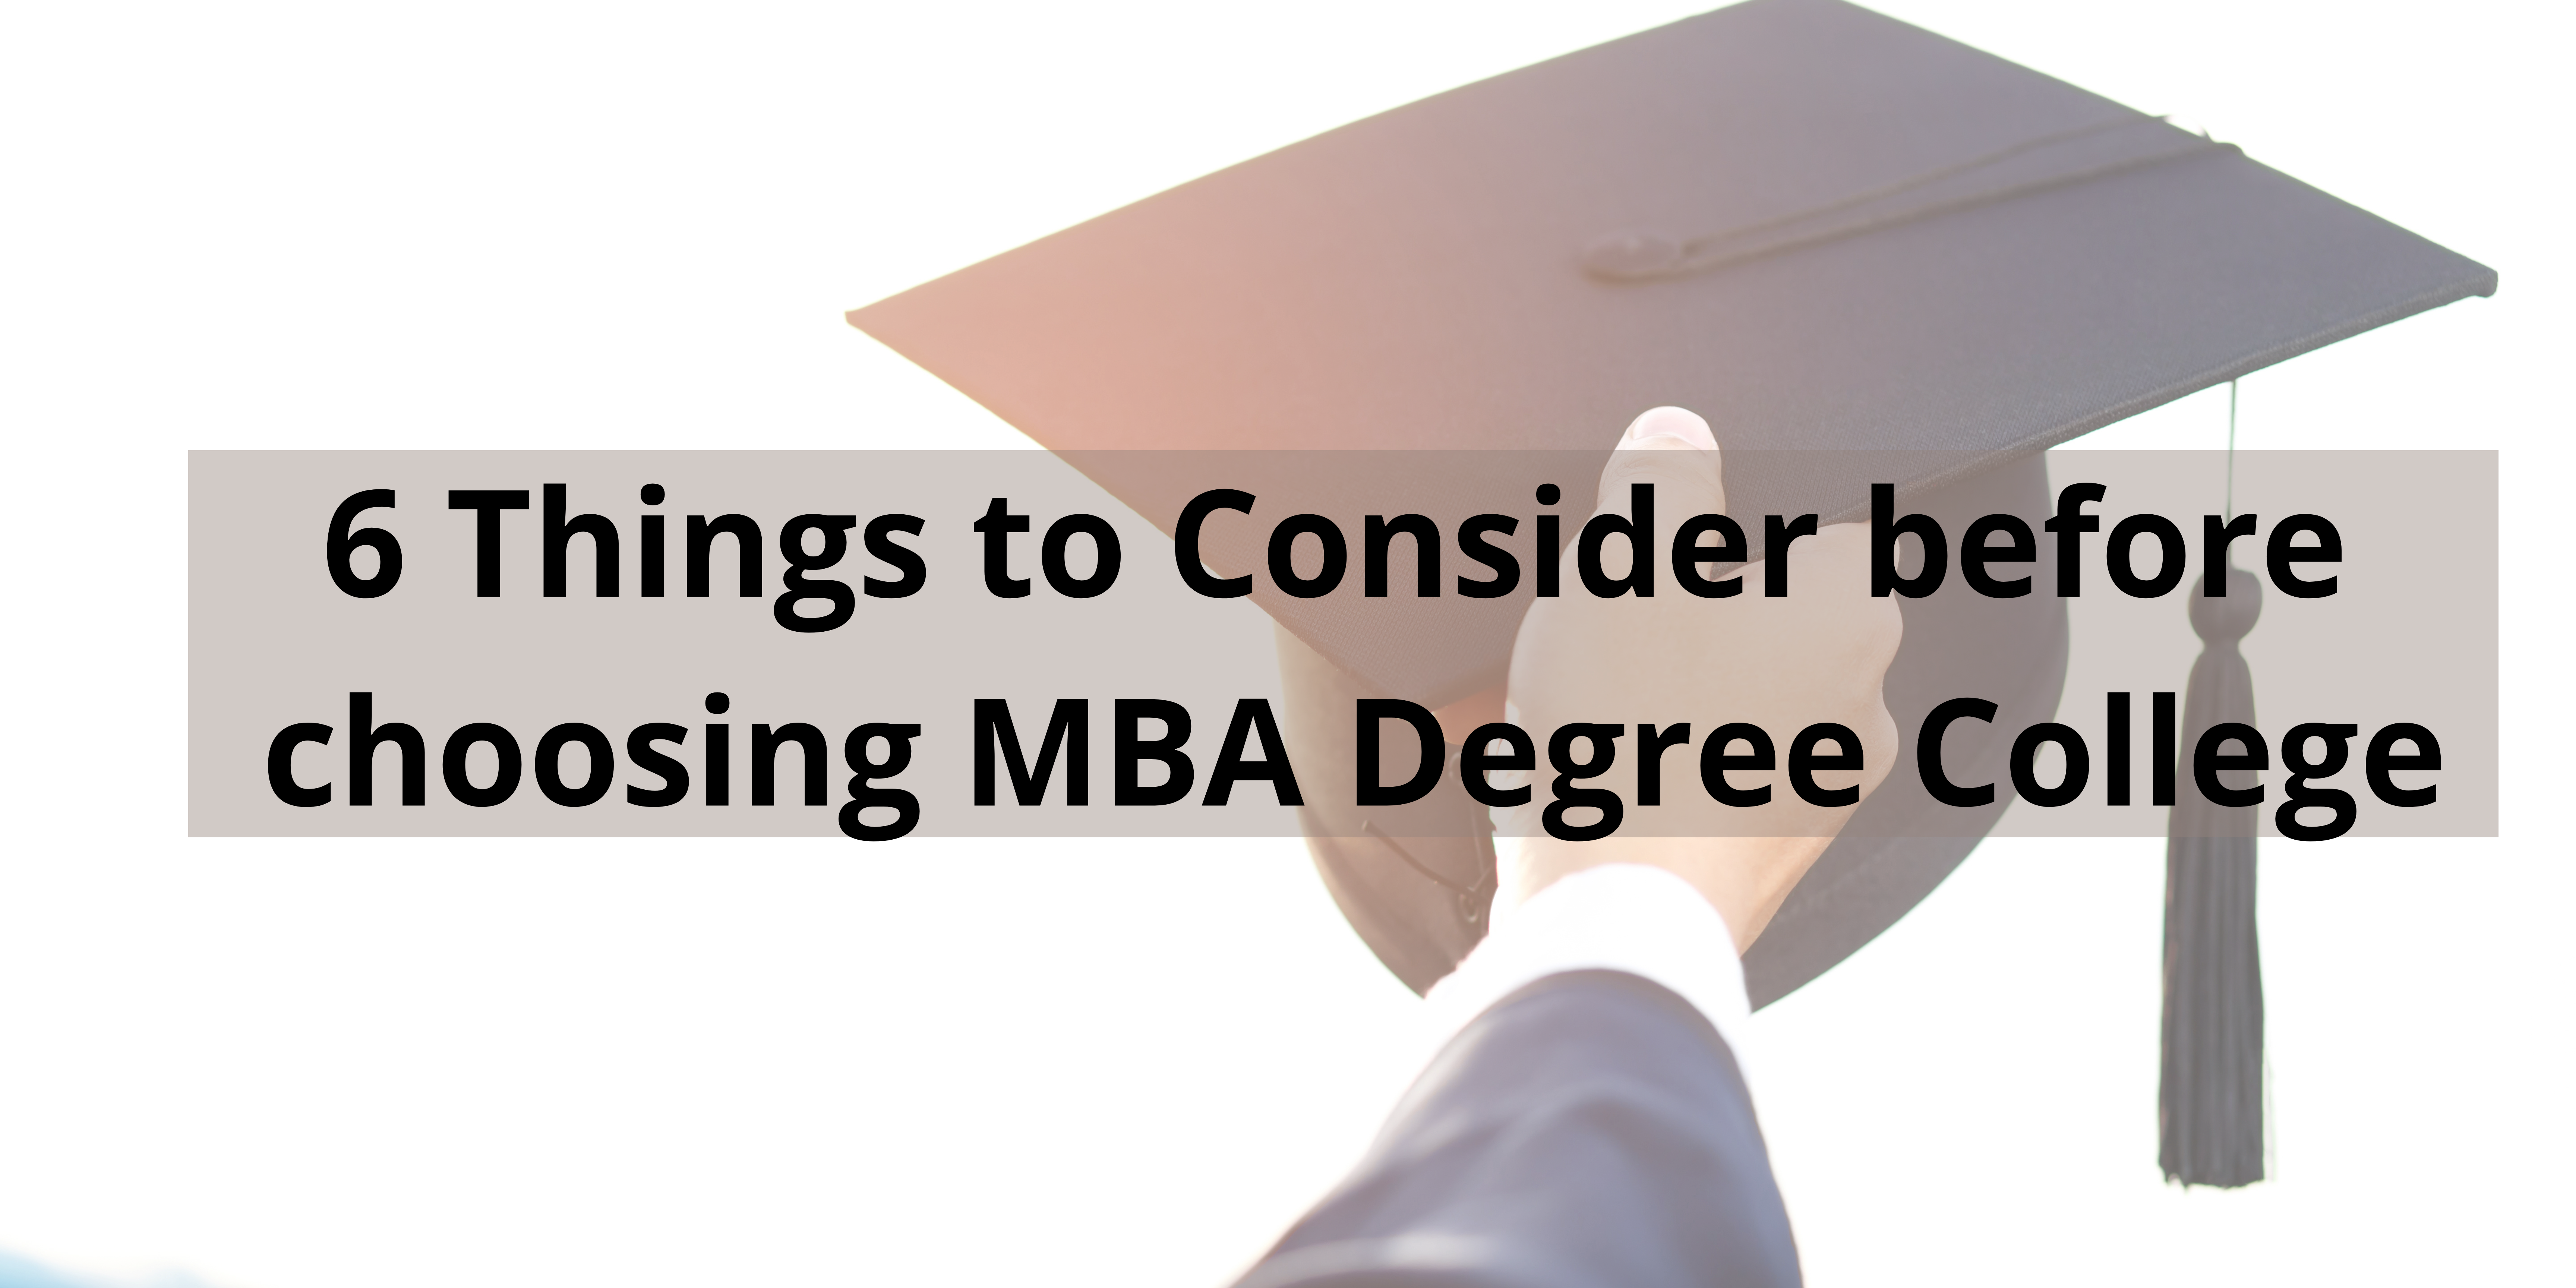 6 Things to Consider before choosing MBA Degree College